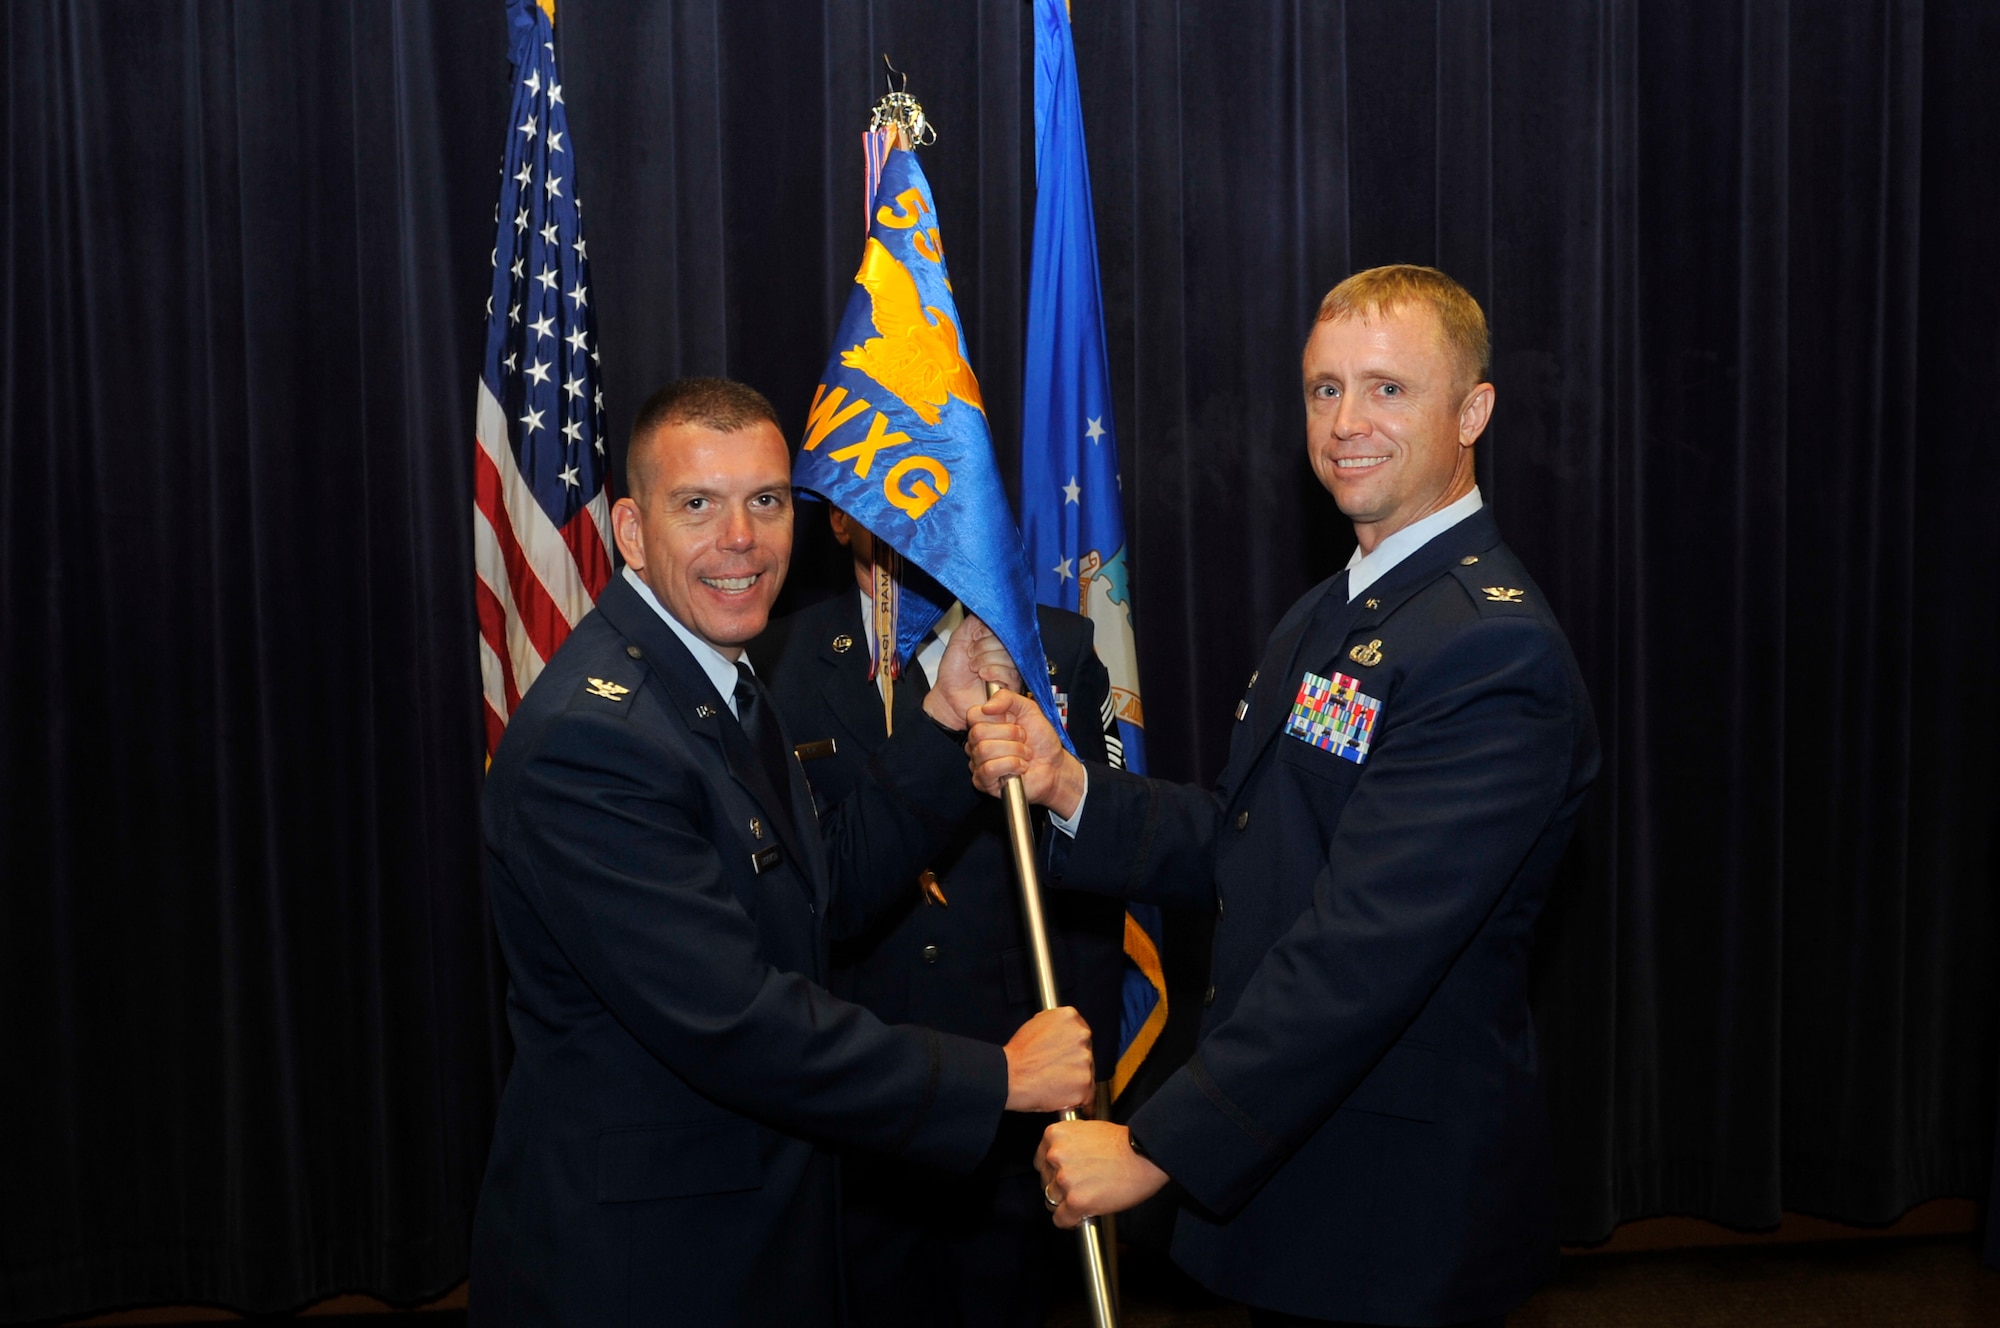 Col. Steven Dickerson, commander of the 557th Weather Wing, left, passes the guidon to Col. Jason Patla, the incoming commander of the 2nd Weather Group in the 557th WW Auditorium at Offutt Air Force Base, Neb., Aug. 1, 2016. Patla assumed command from Col. Steven Shannon, who served as commander for the last two years. (U.S. Air Force photo/Jeff Bridges)